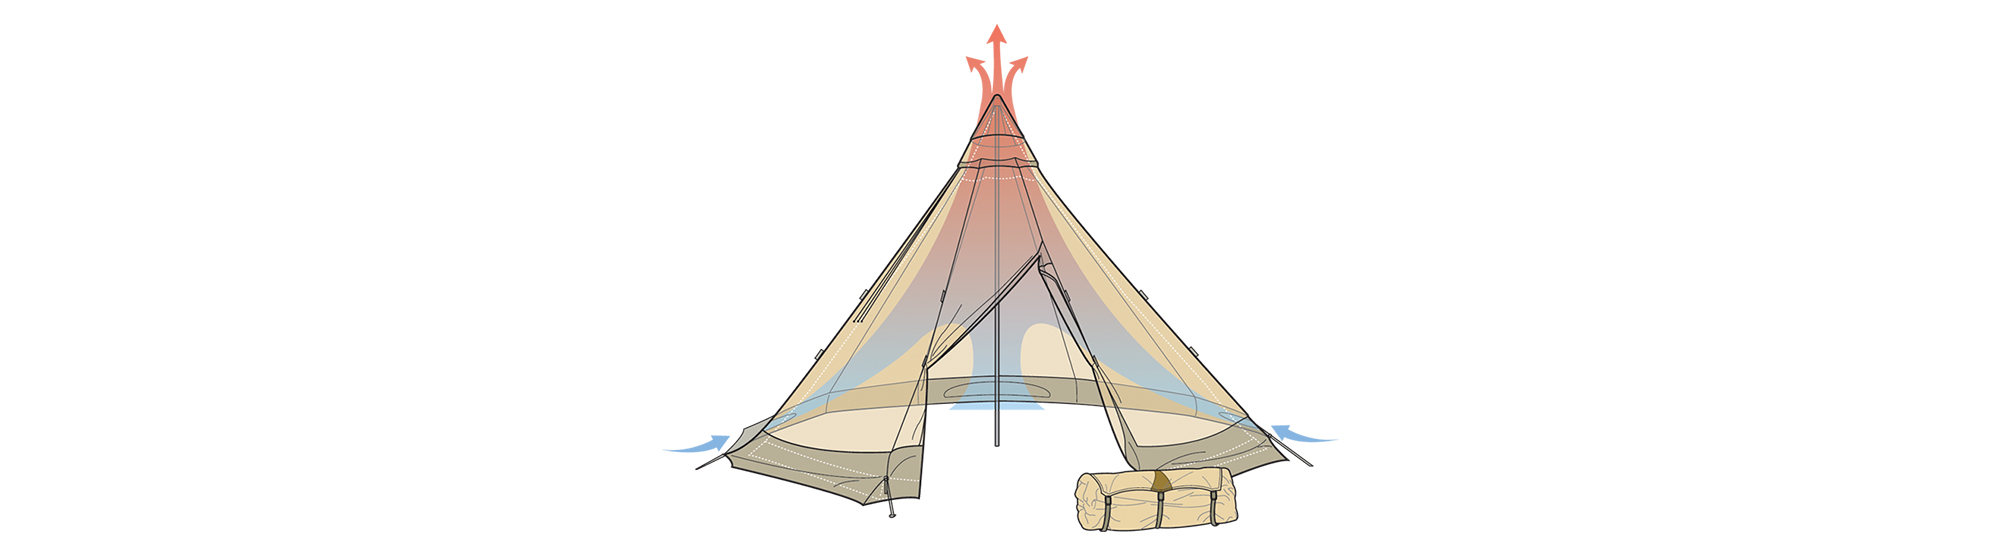 How to avoid hot mornings when camping in a Nordic tipi?